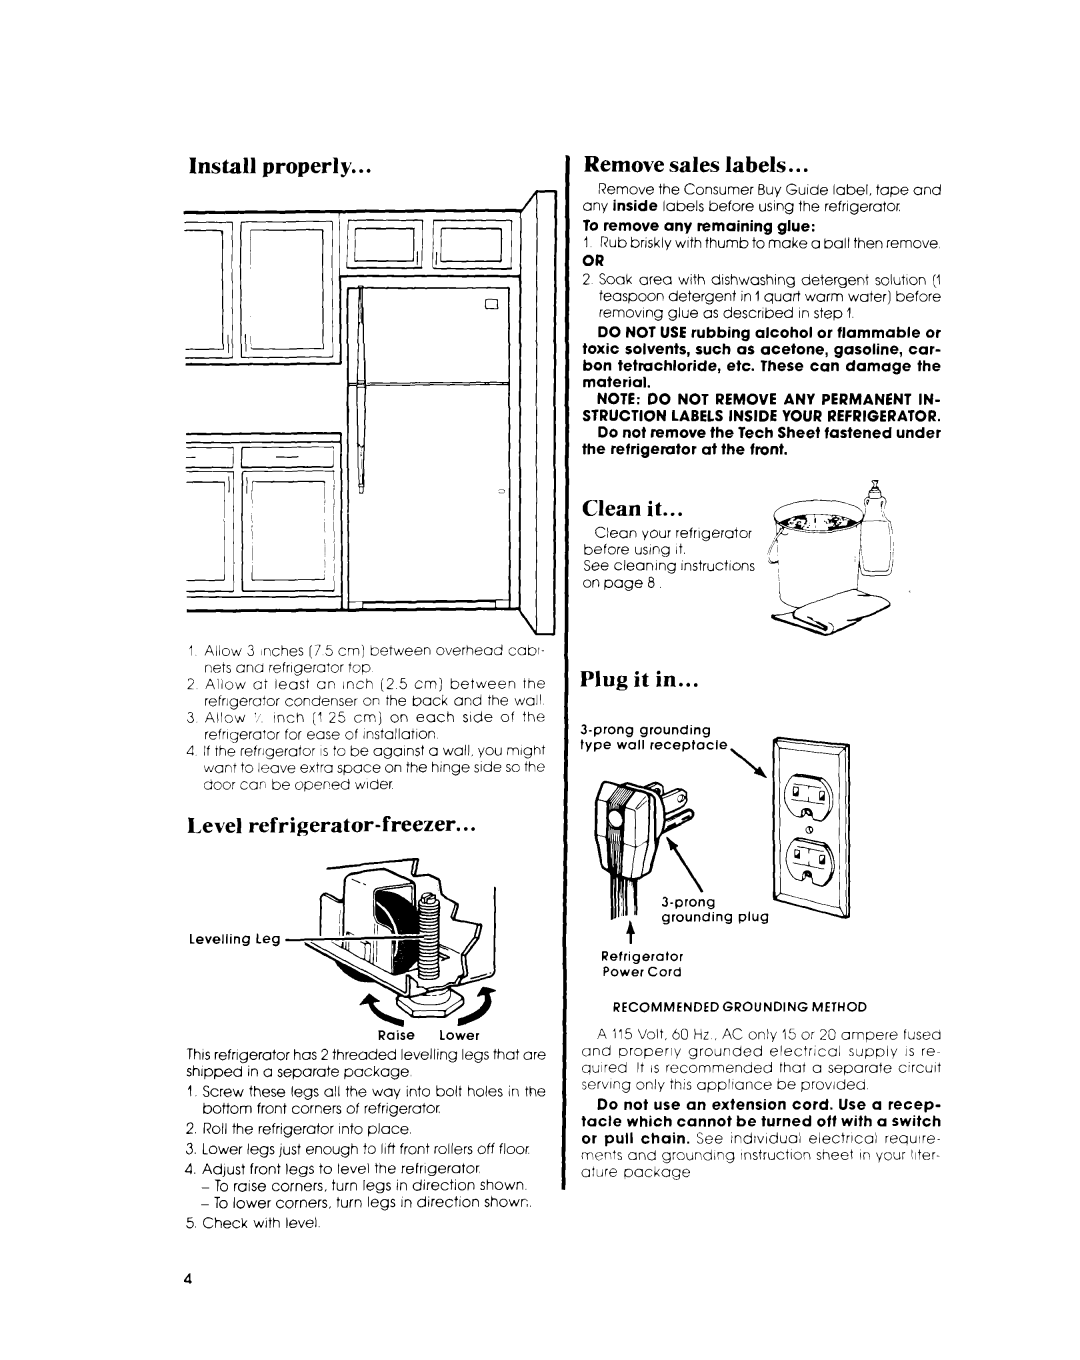 Whirlpool ET1NK manual Install properly, Remove, sales, labels, Clean it, Plug it in, Level refrigerator-freezer 